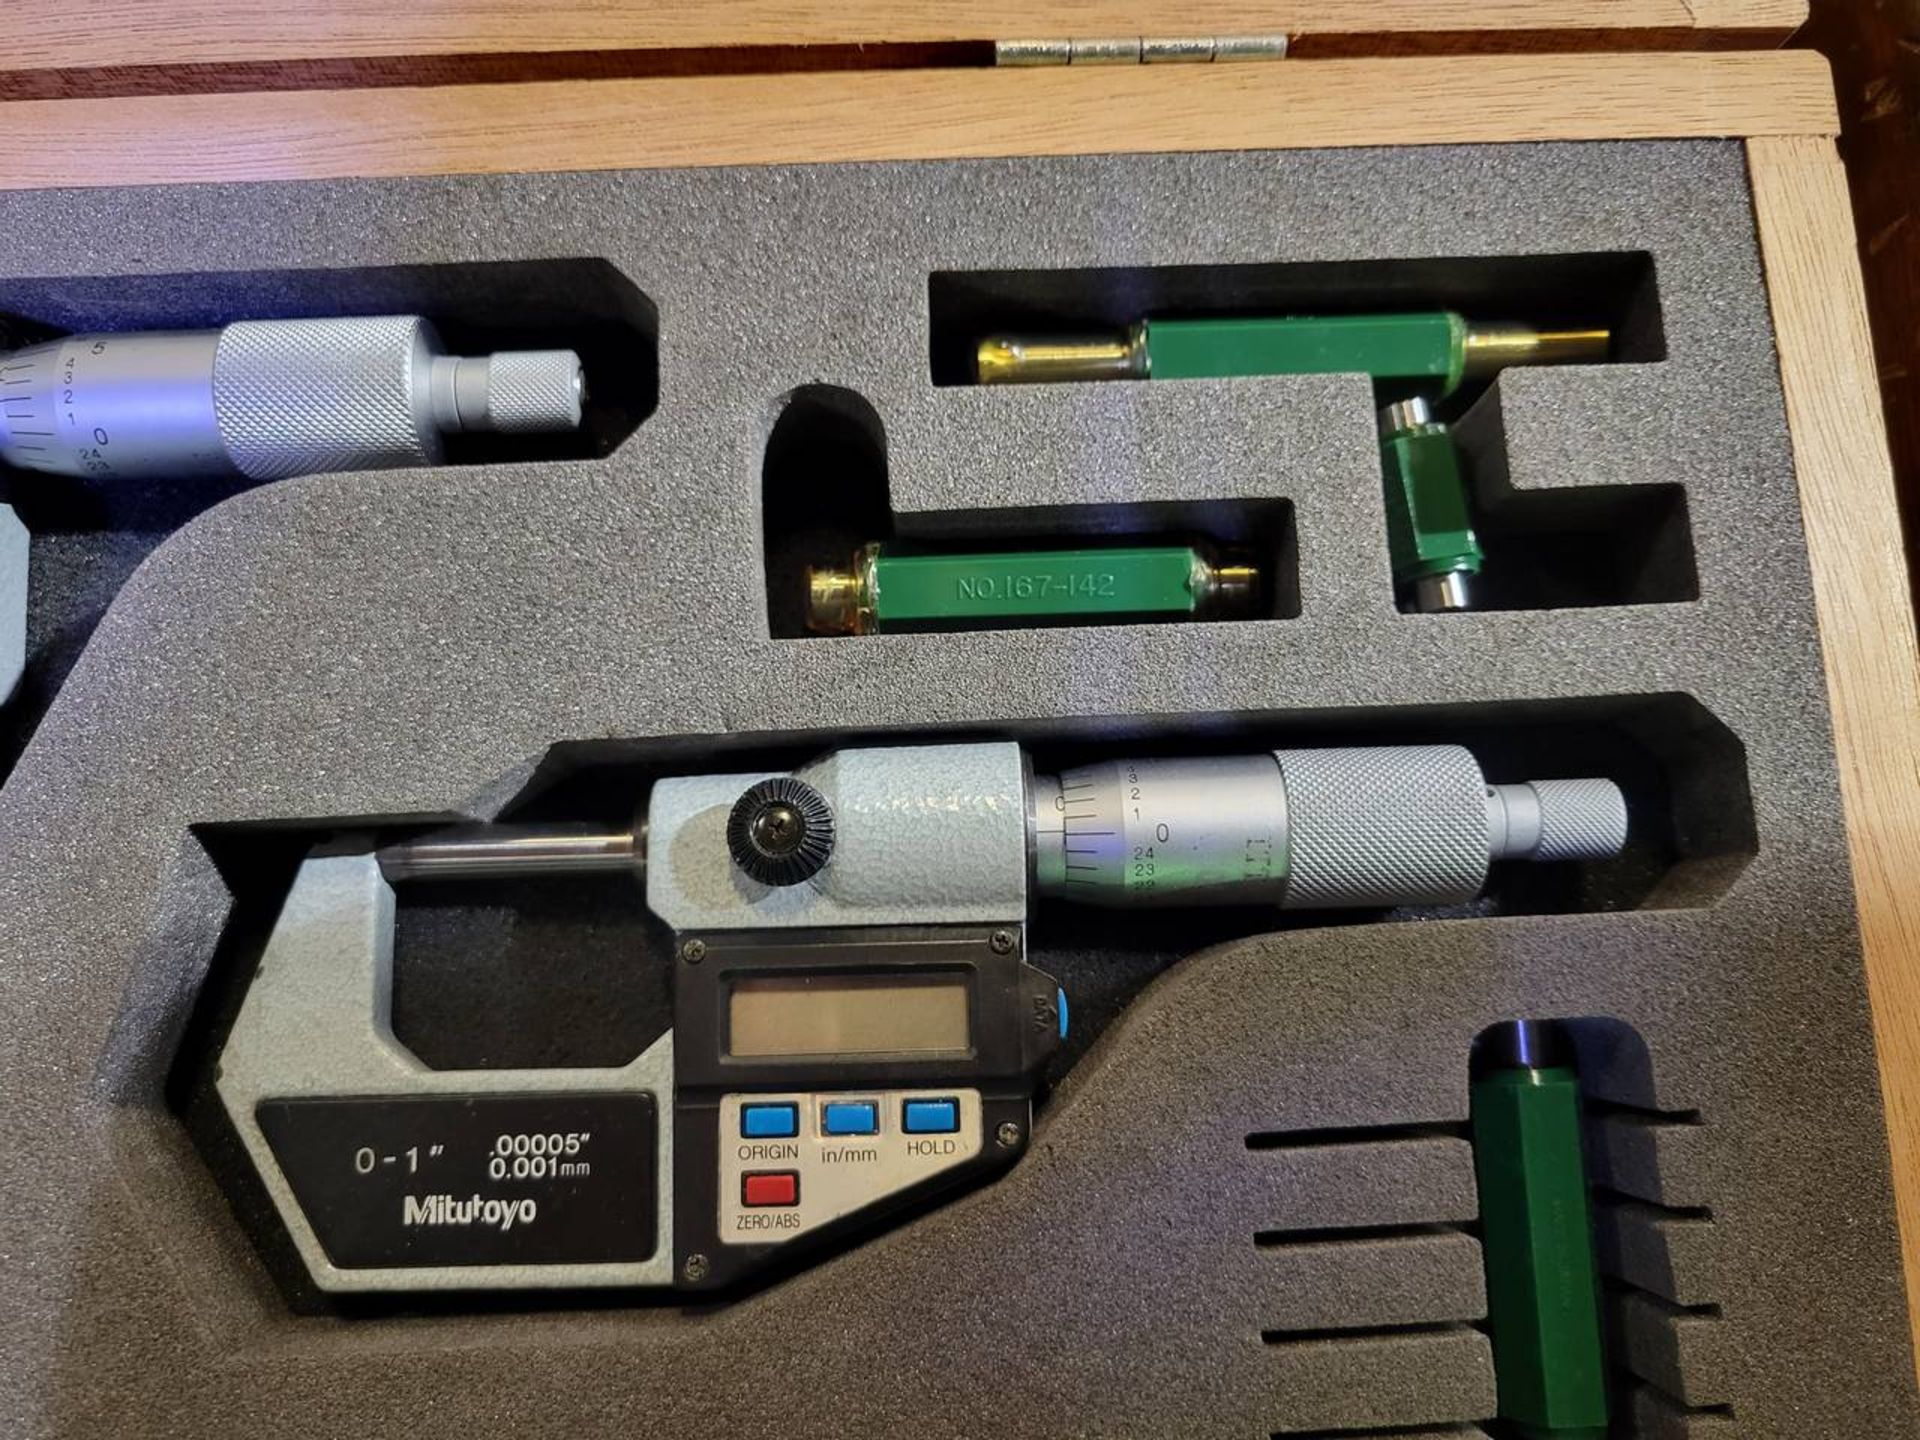 Mitutoyo 4pc Digital OD Micrometer set, 0-4", with case - Image 3 of 5